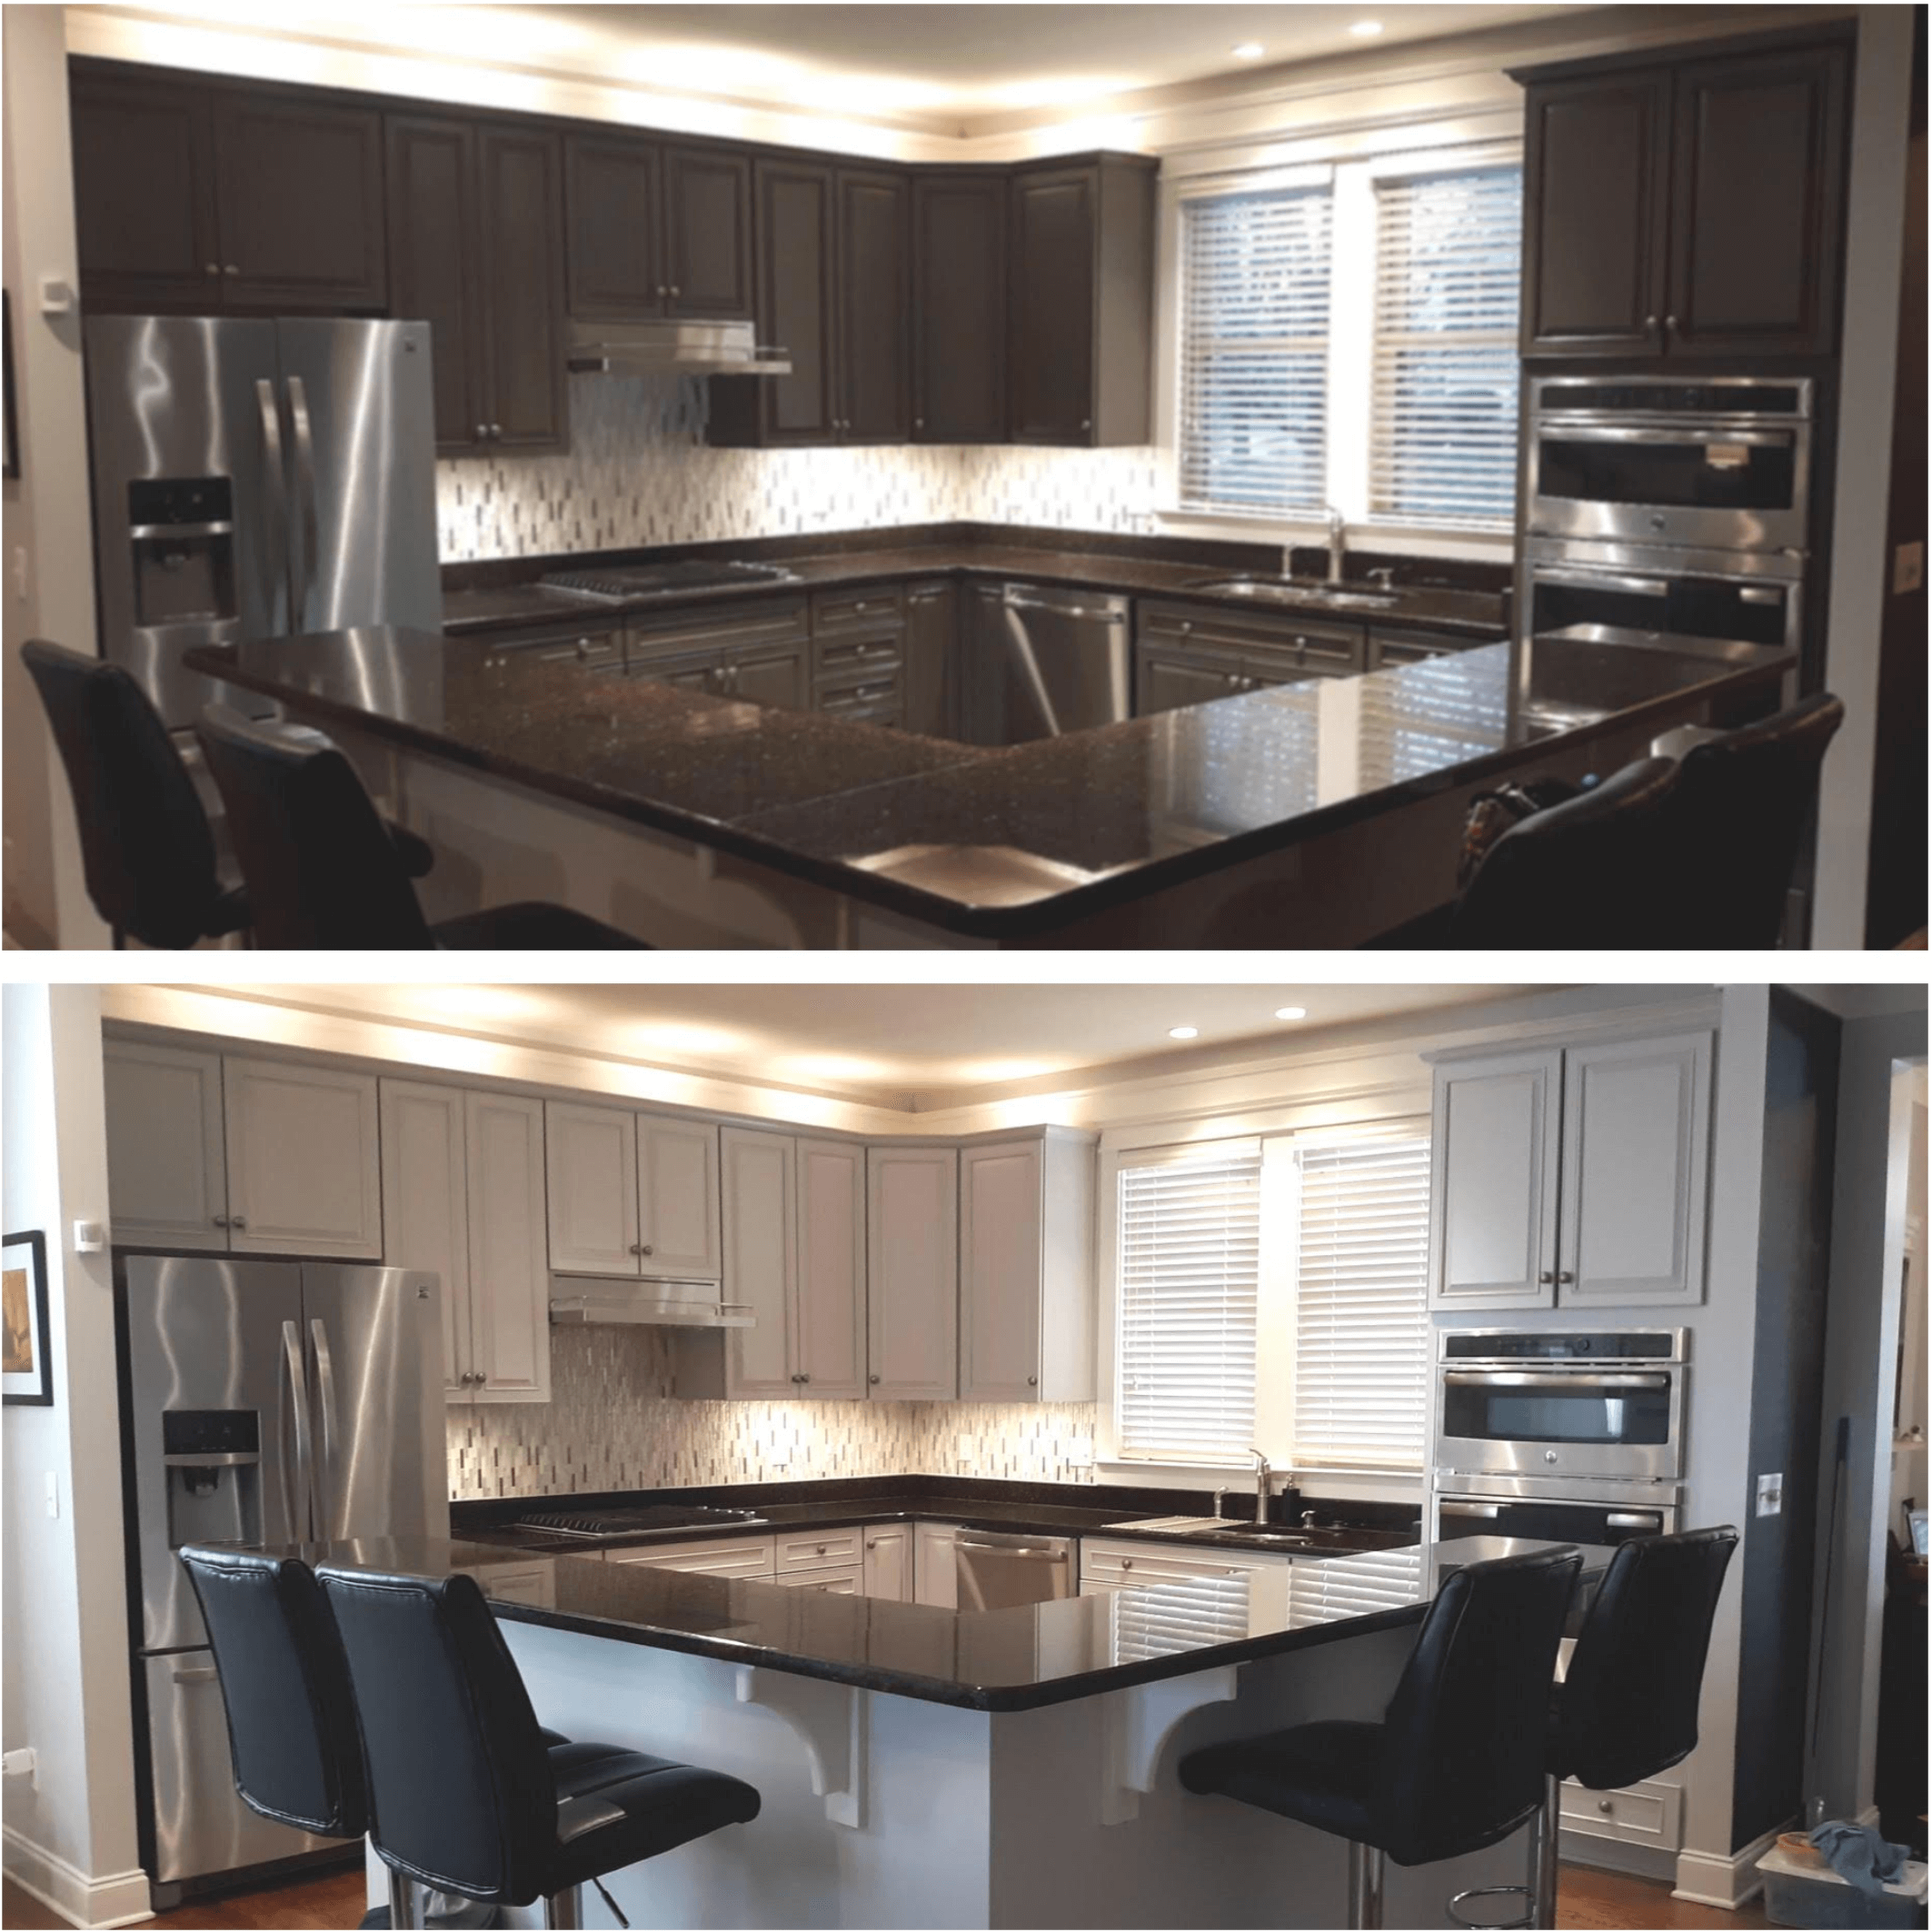 before and after shot of cabinets we refinished